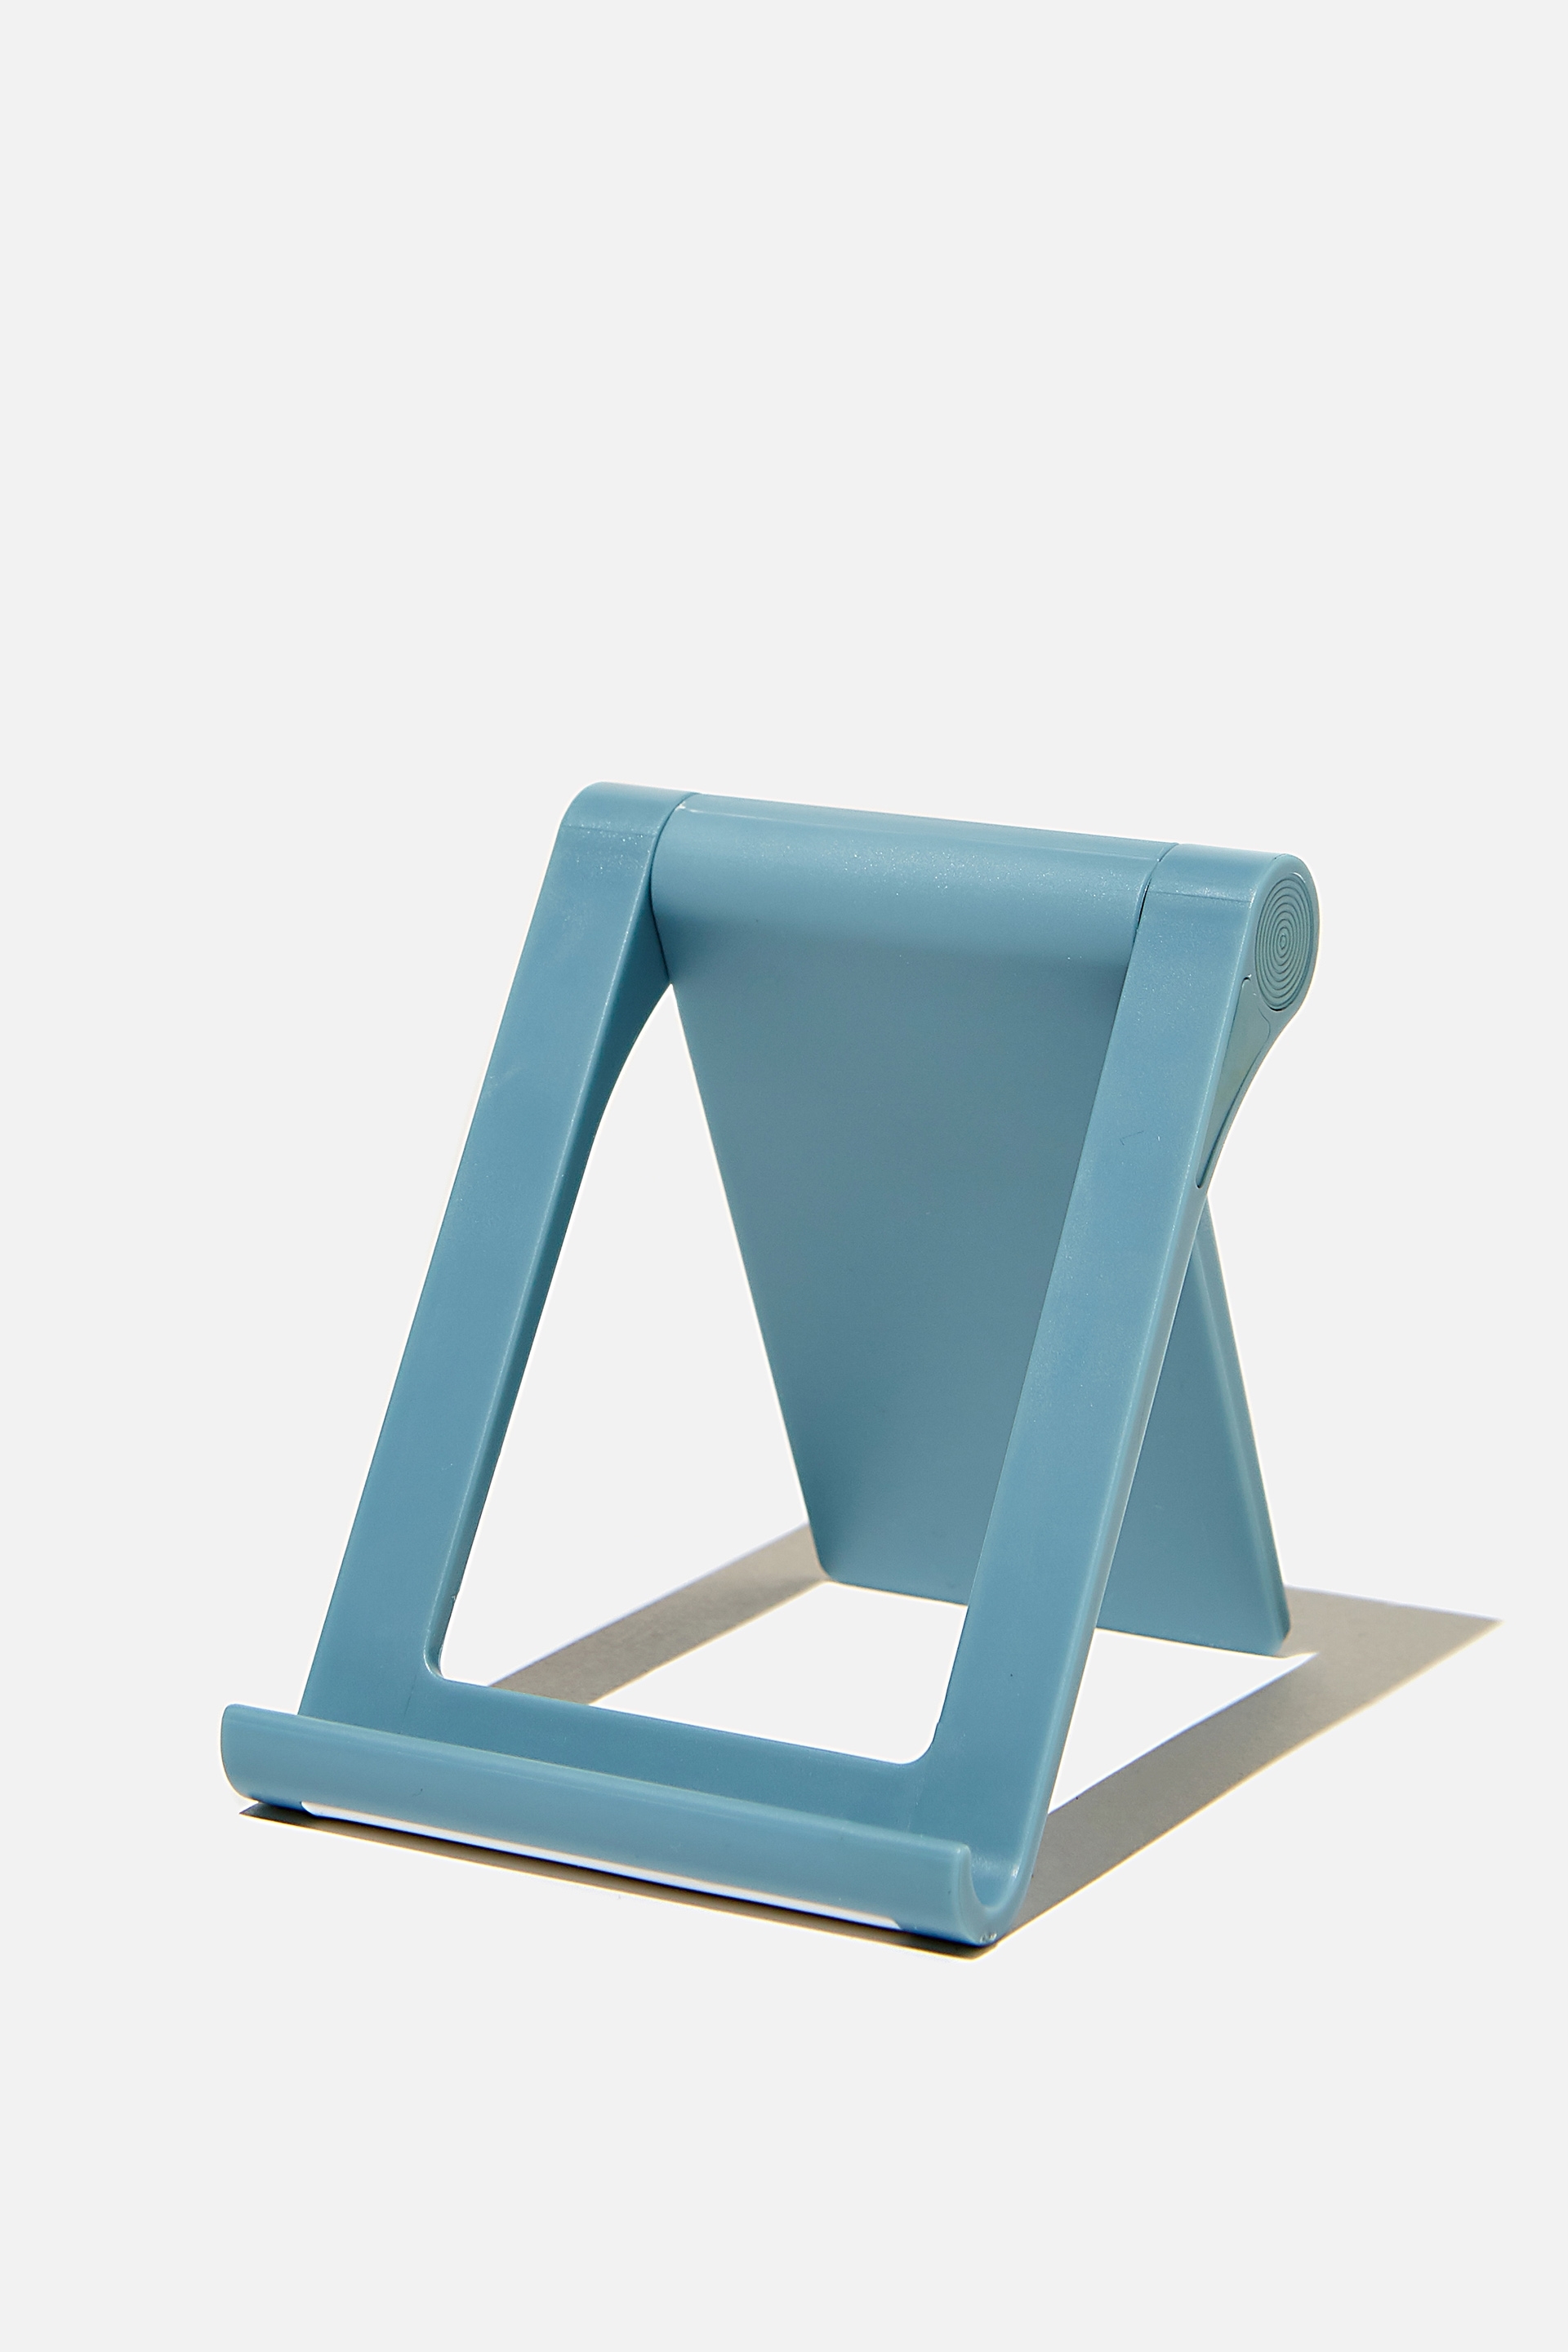 Typo - Collapsible Phone Stand - Denim blue